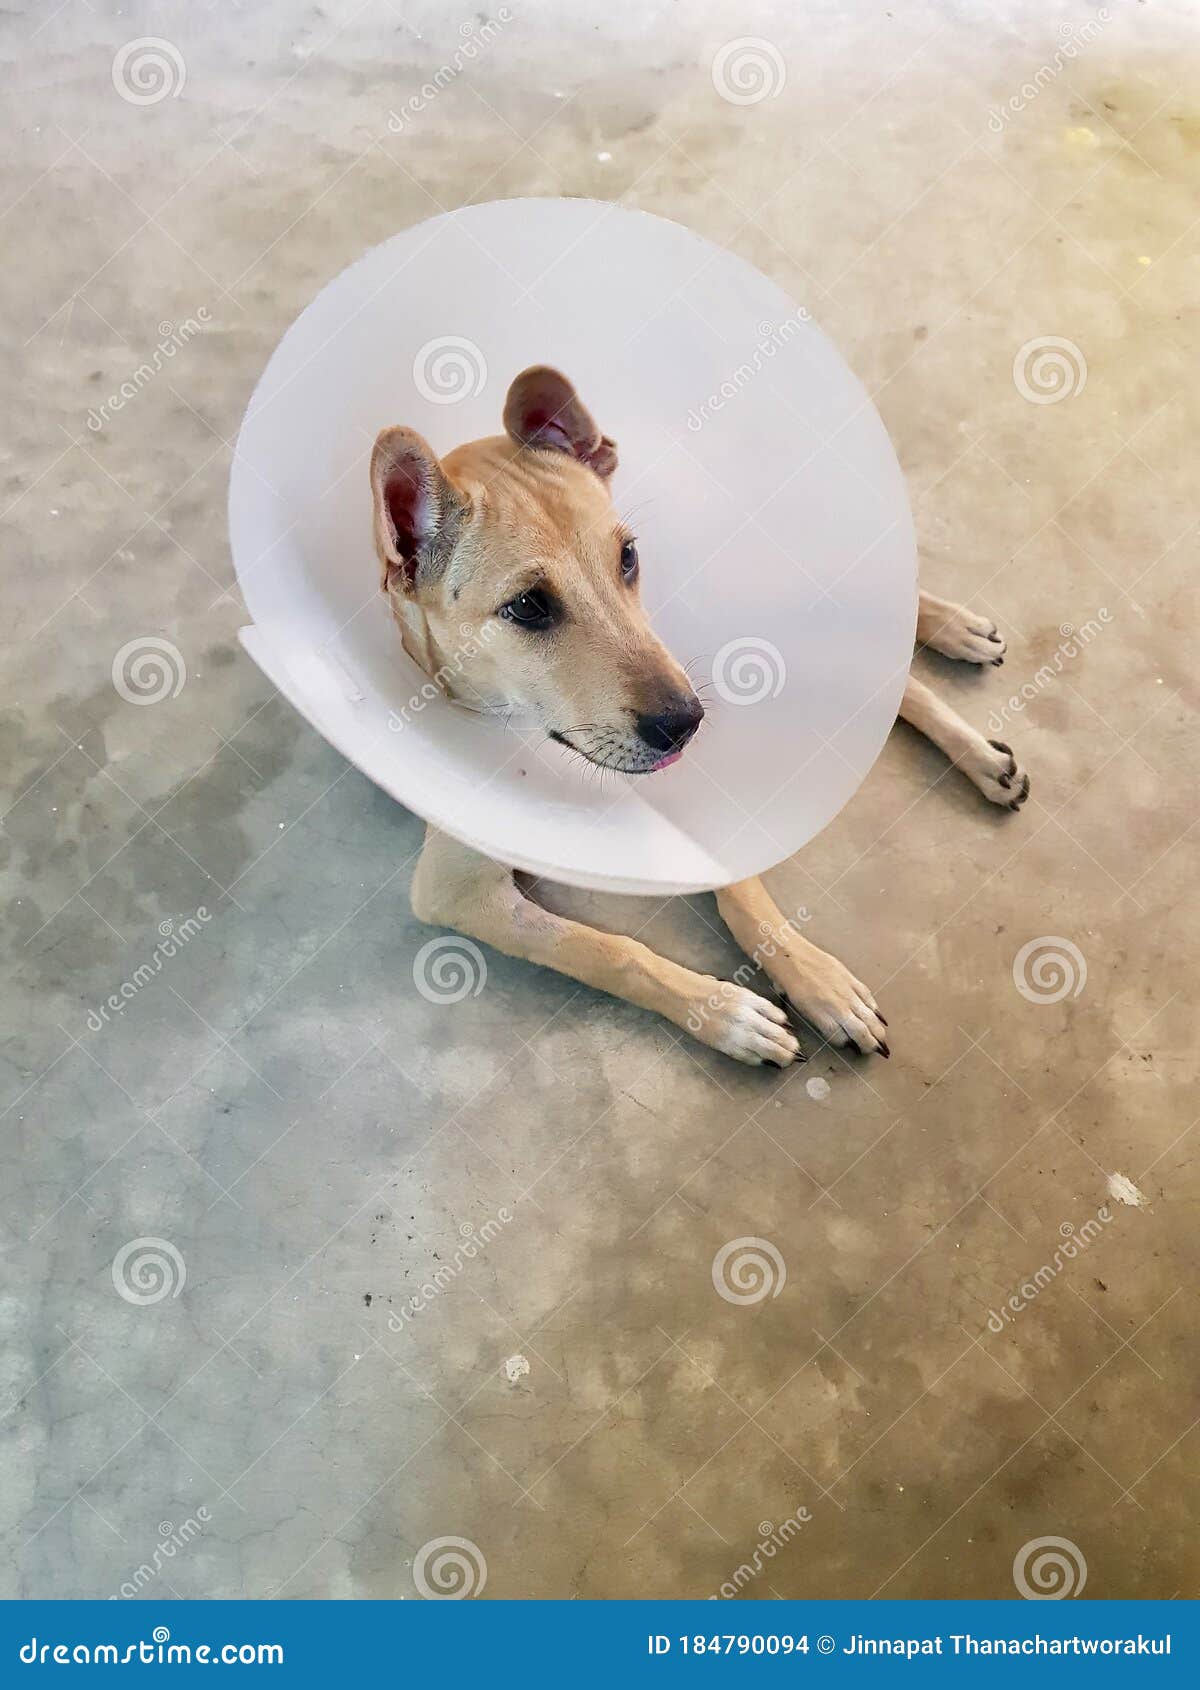 Dogs Wear Head Covers To Prevent Licking the Wound. Stock Photo